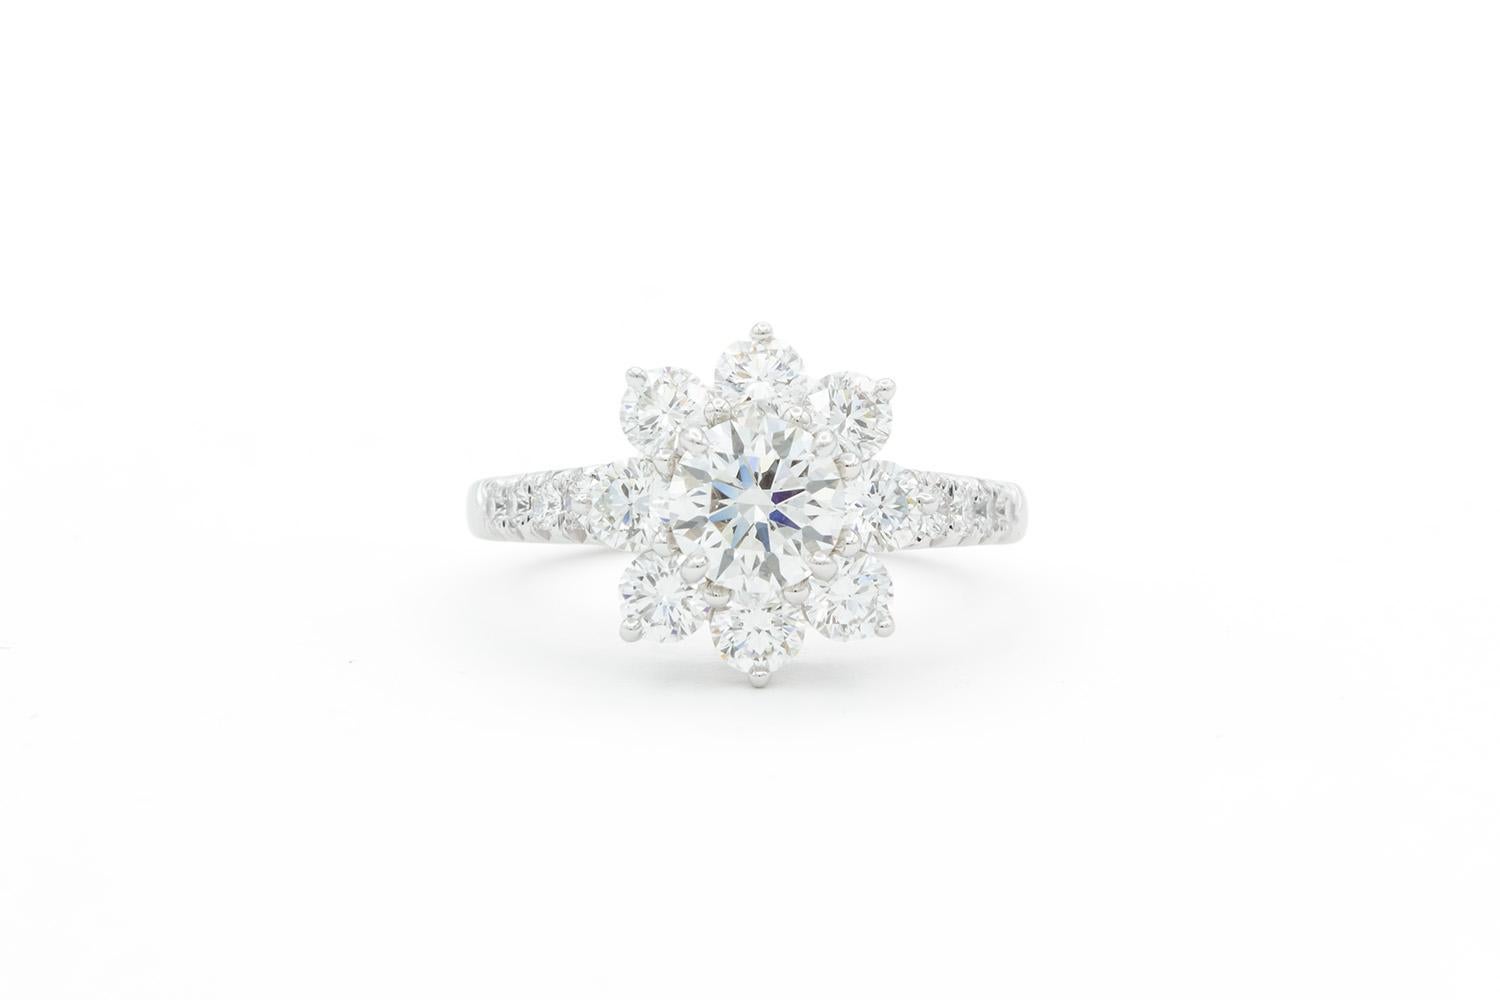 We are pleased to offer this Harry Winston GIA Certified Sunflower Ring. This beautiful and fun Harry Winston ring features a GIA certified 0.70ct F/VVS2 triple excellent round brilliant cut center diamond set in a Harry Winston platinum Sunflower